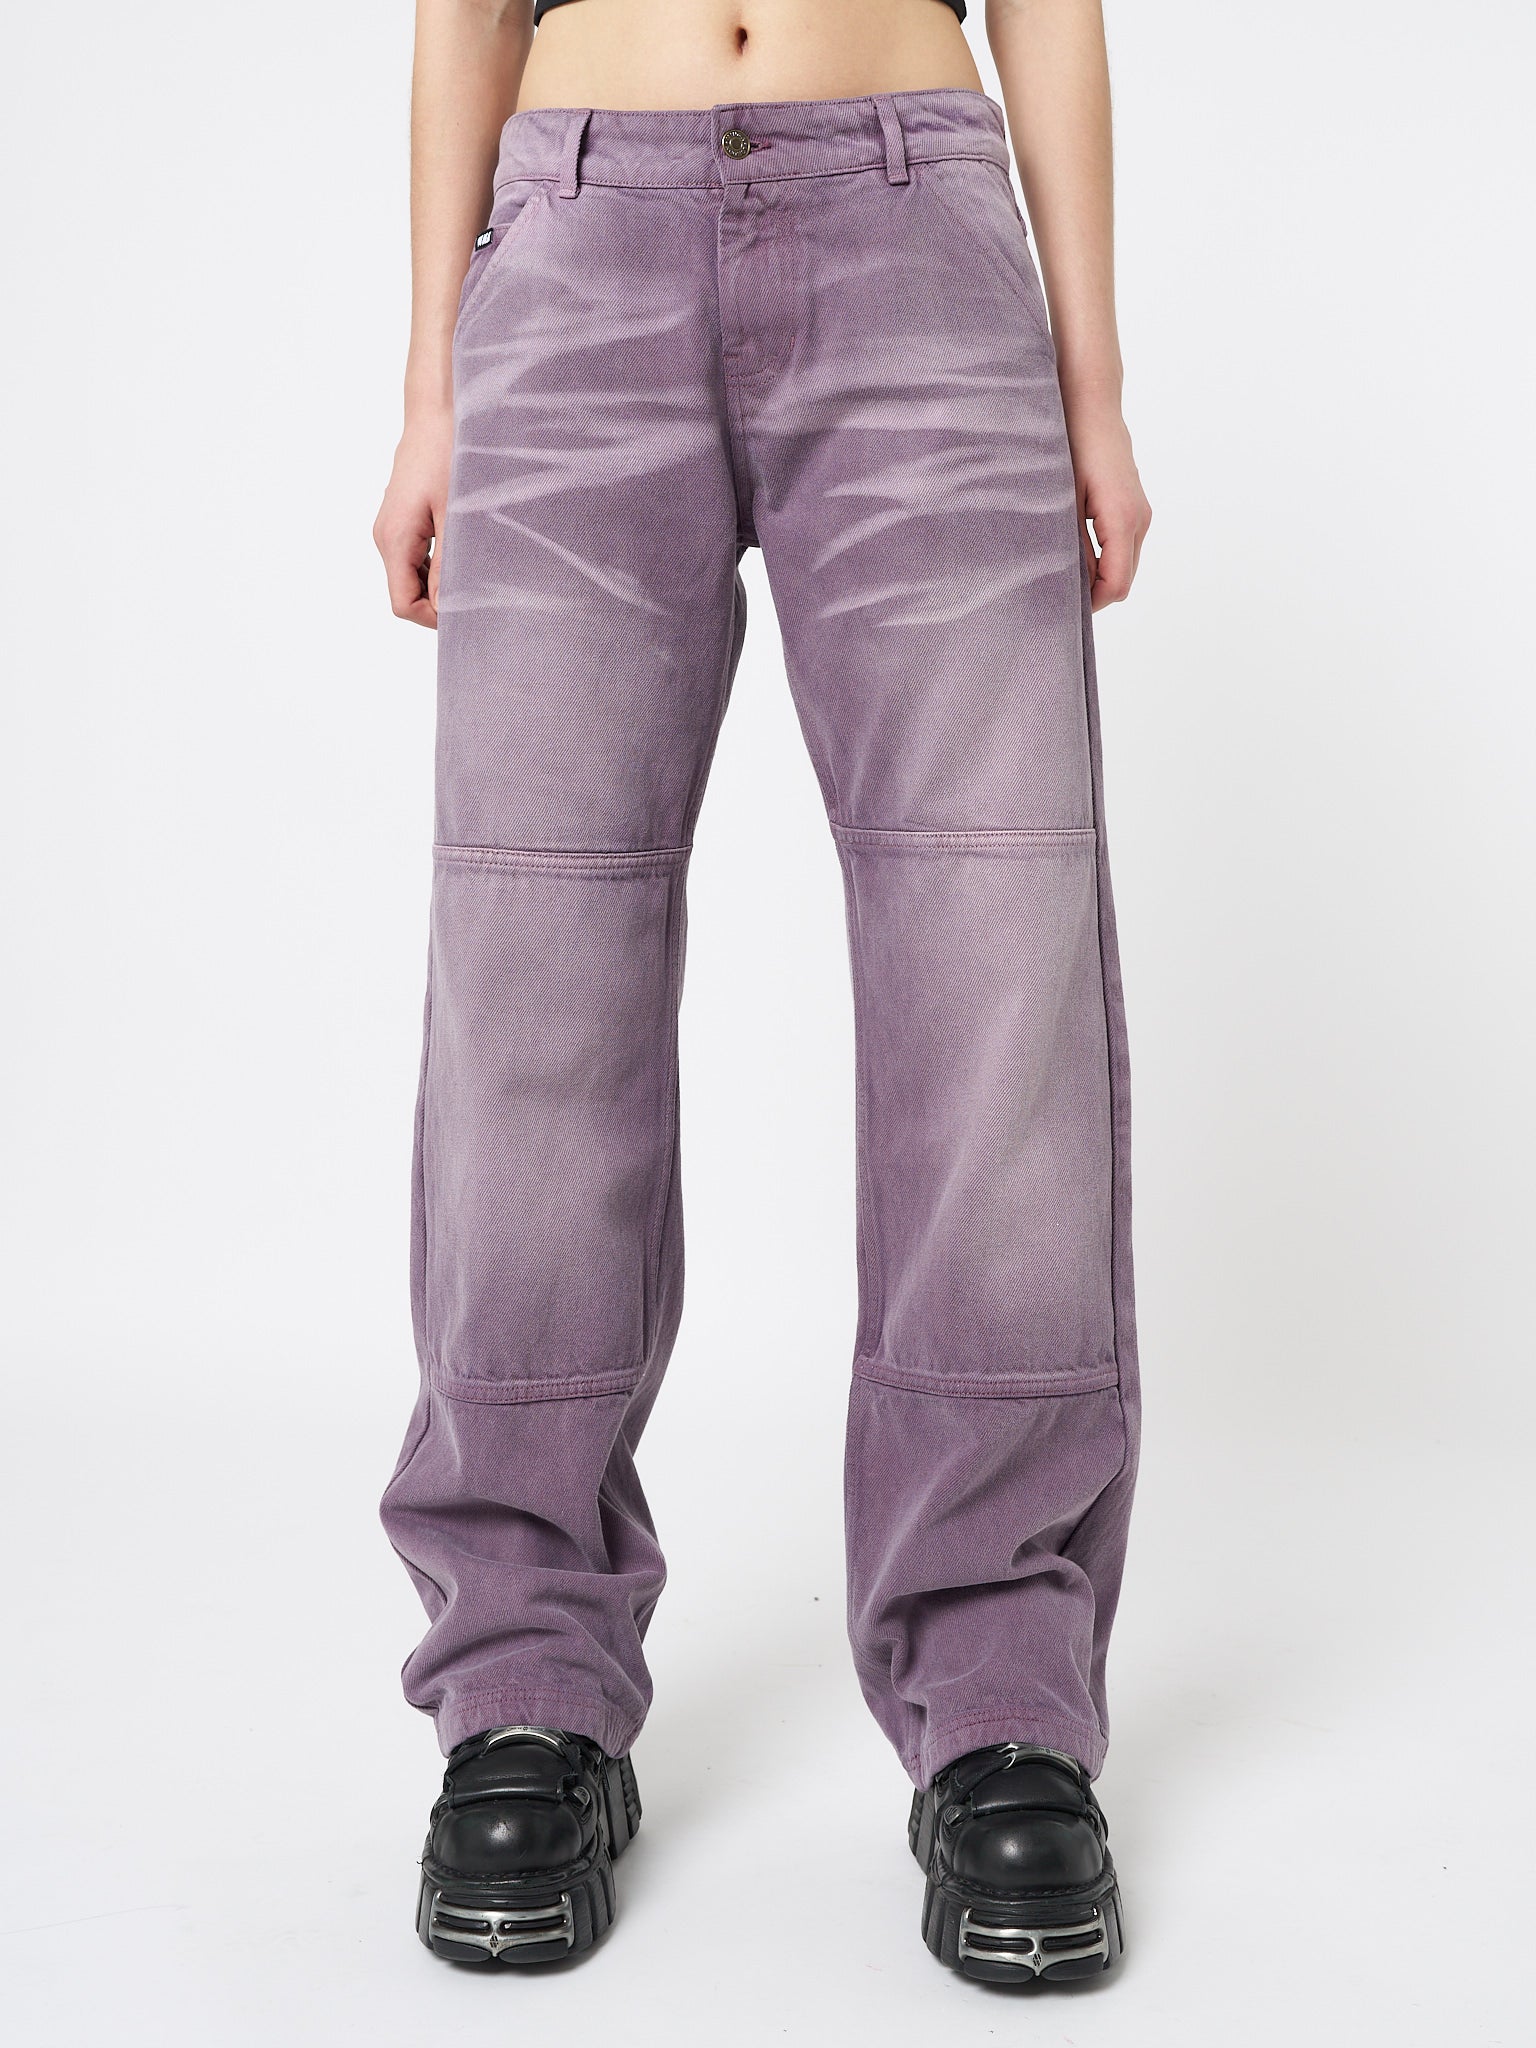 Stylish and comfortable straight jeans in a trendy washed mauve color, perfect for everyday wear.